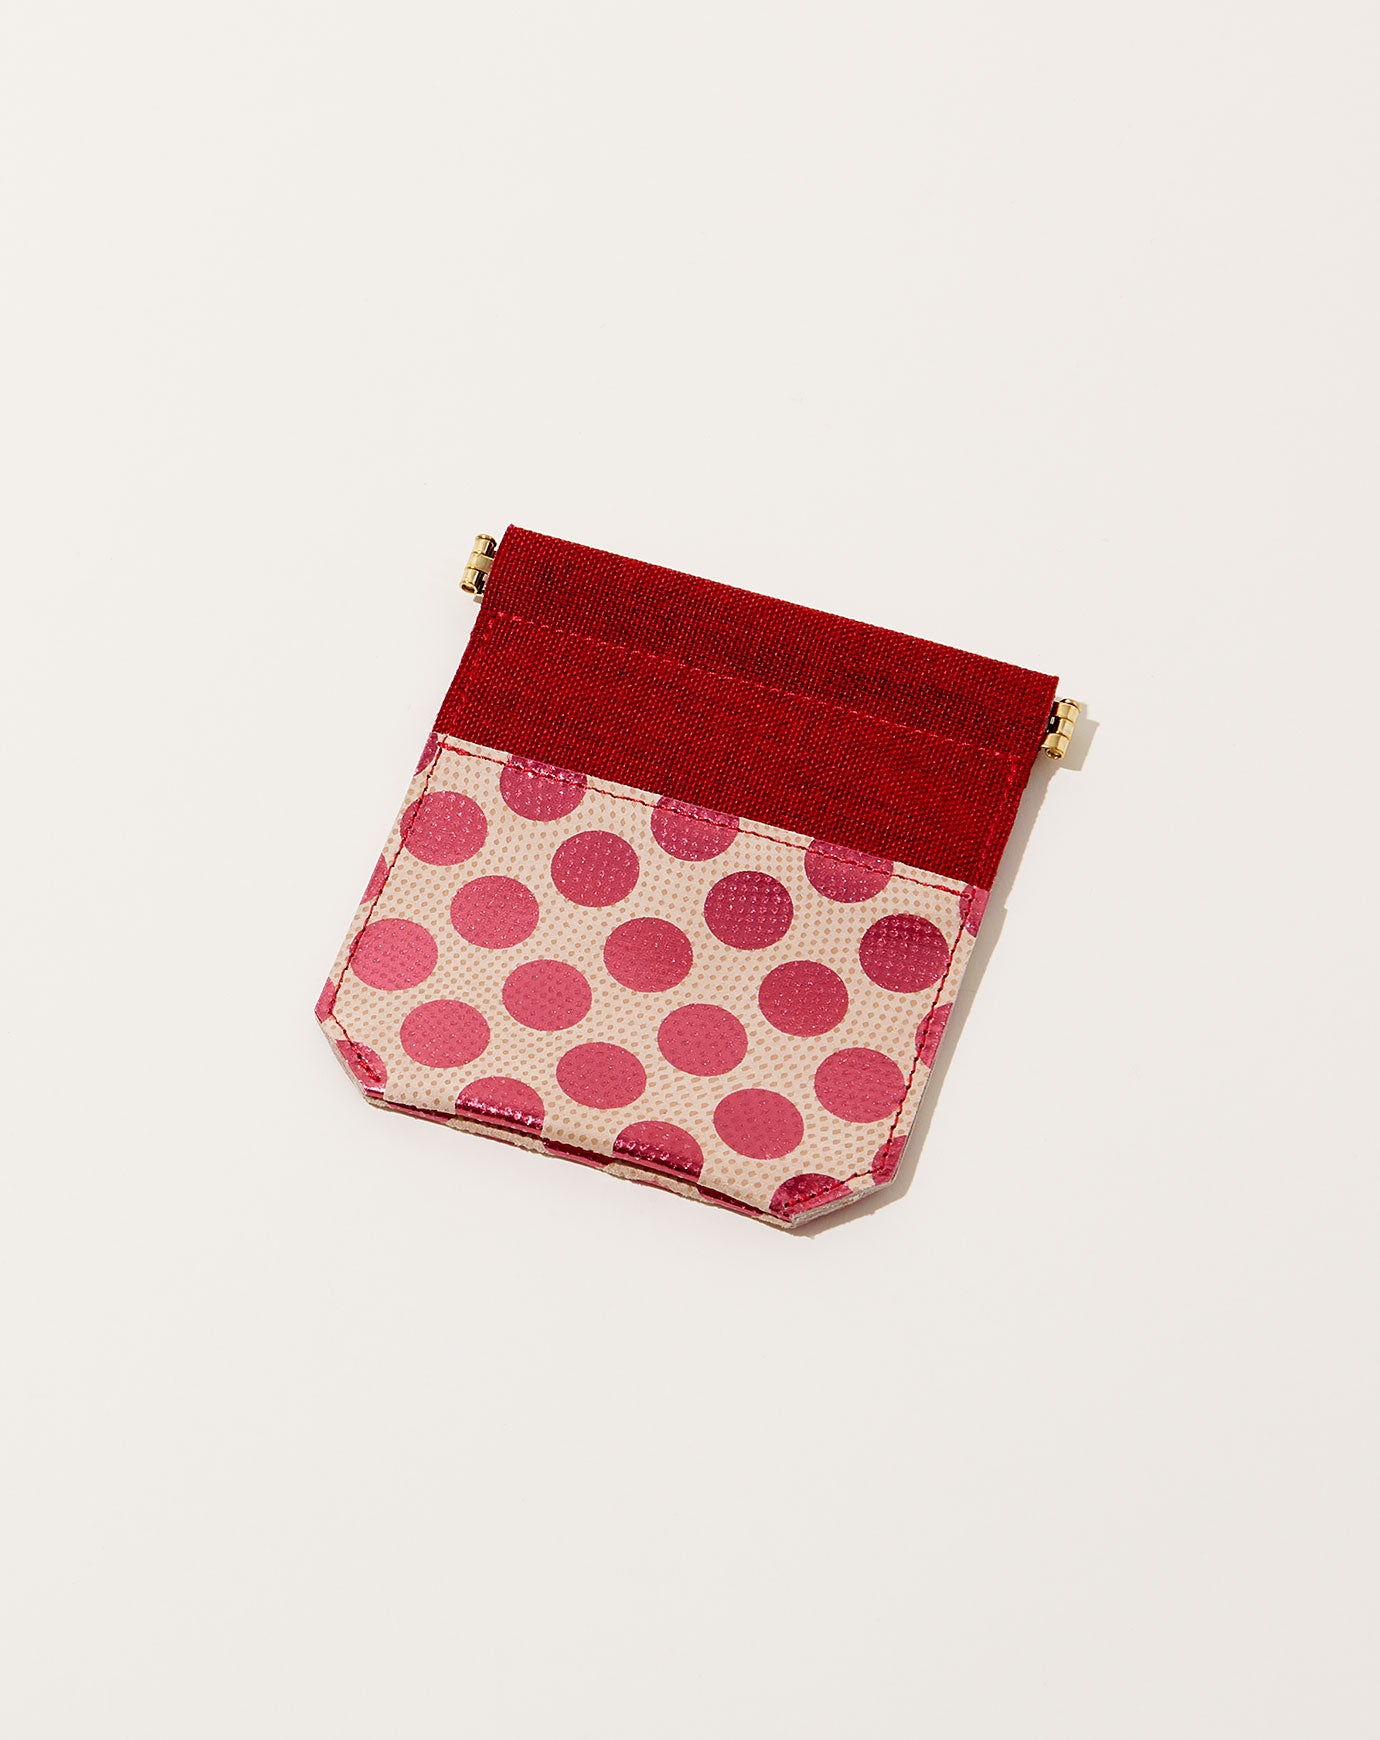 Carmine Ecology Leather Mini Pouch in Pink